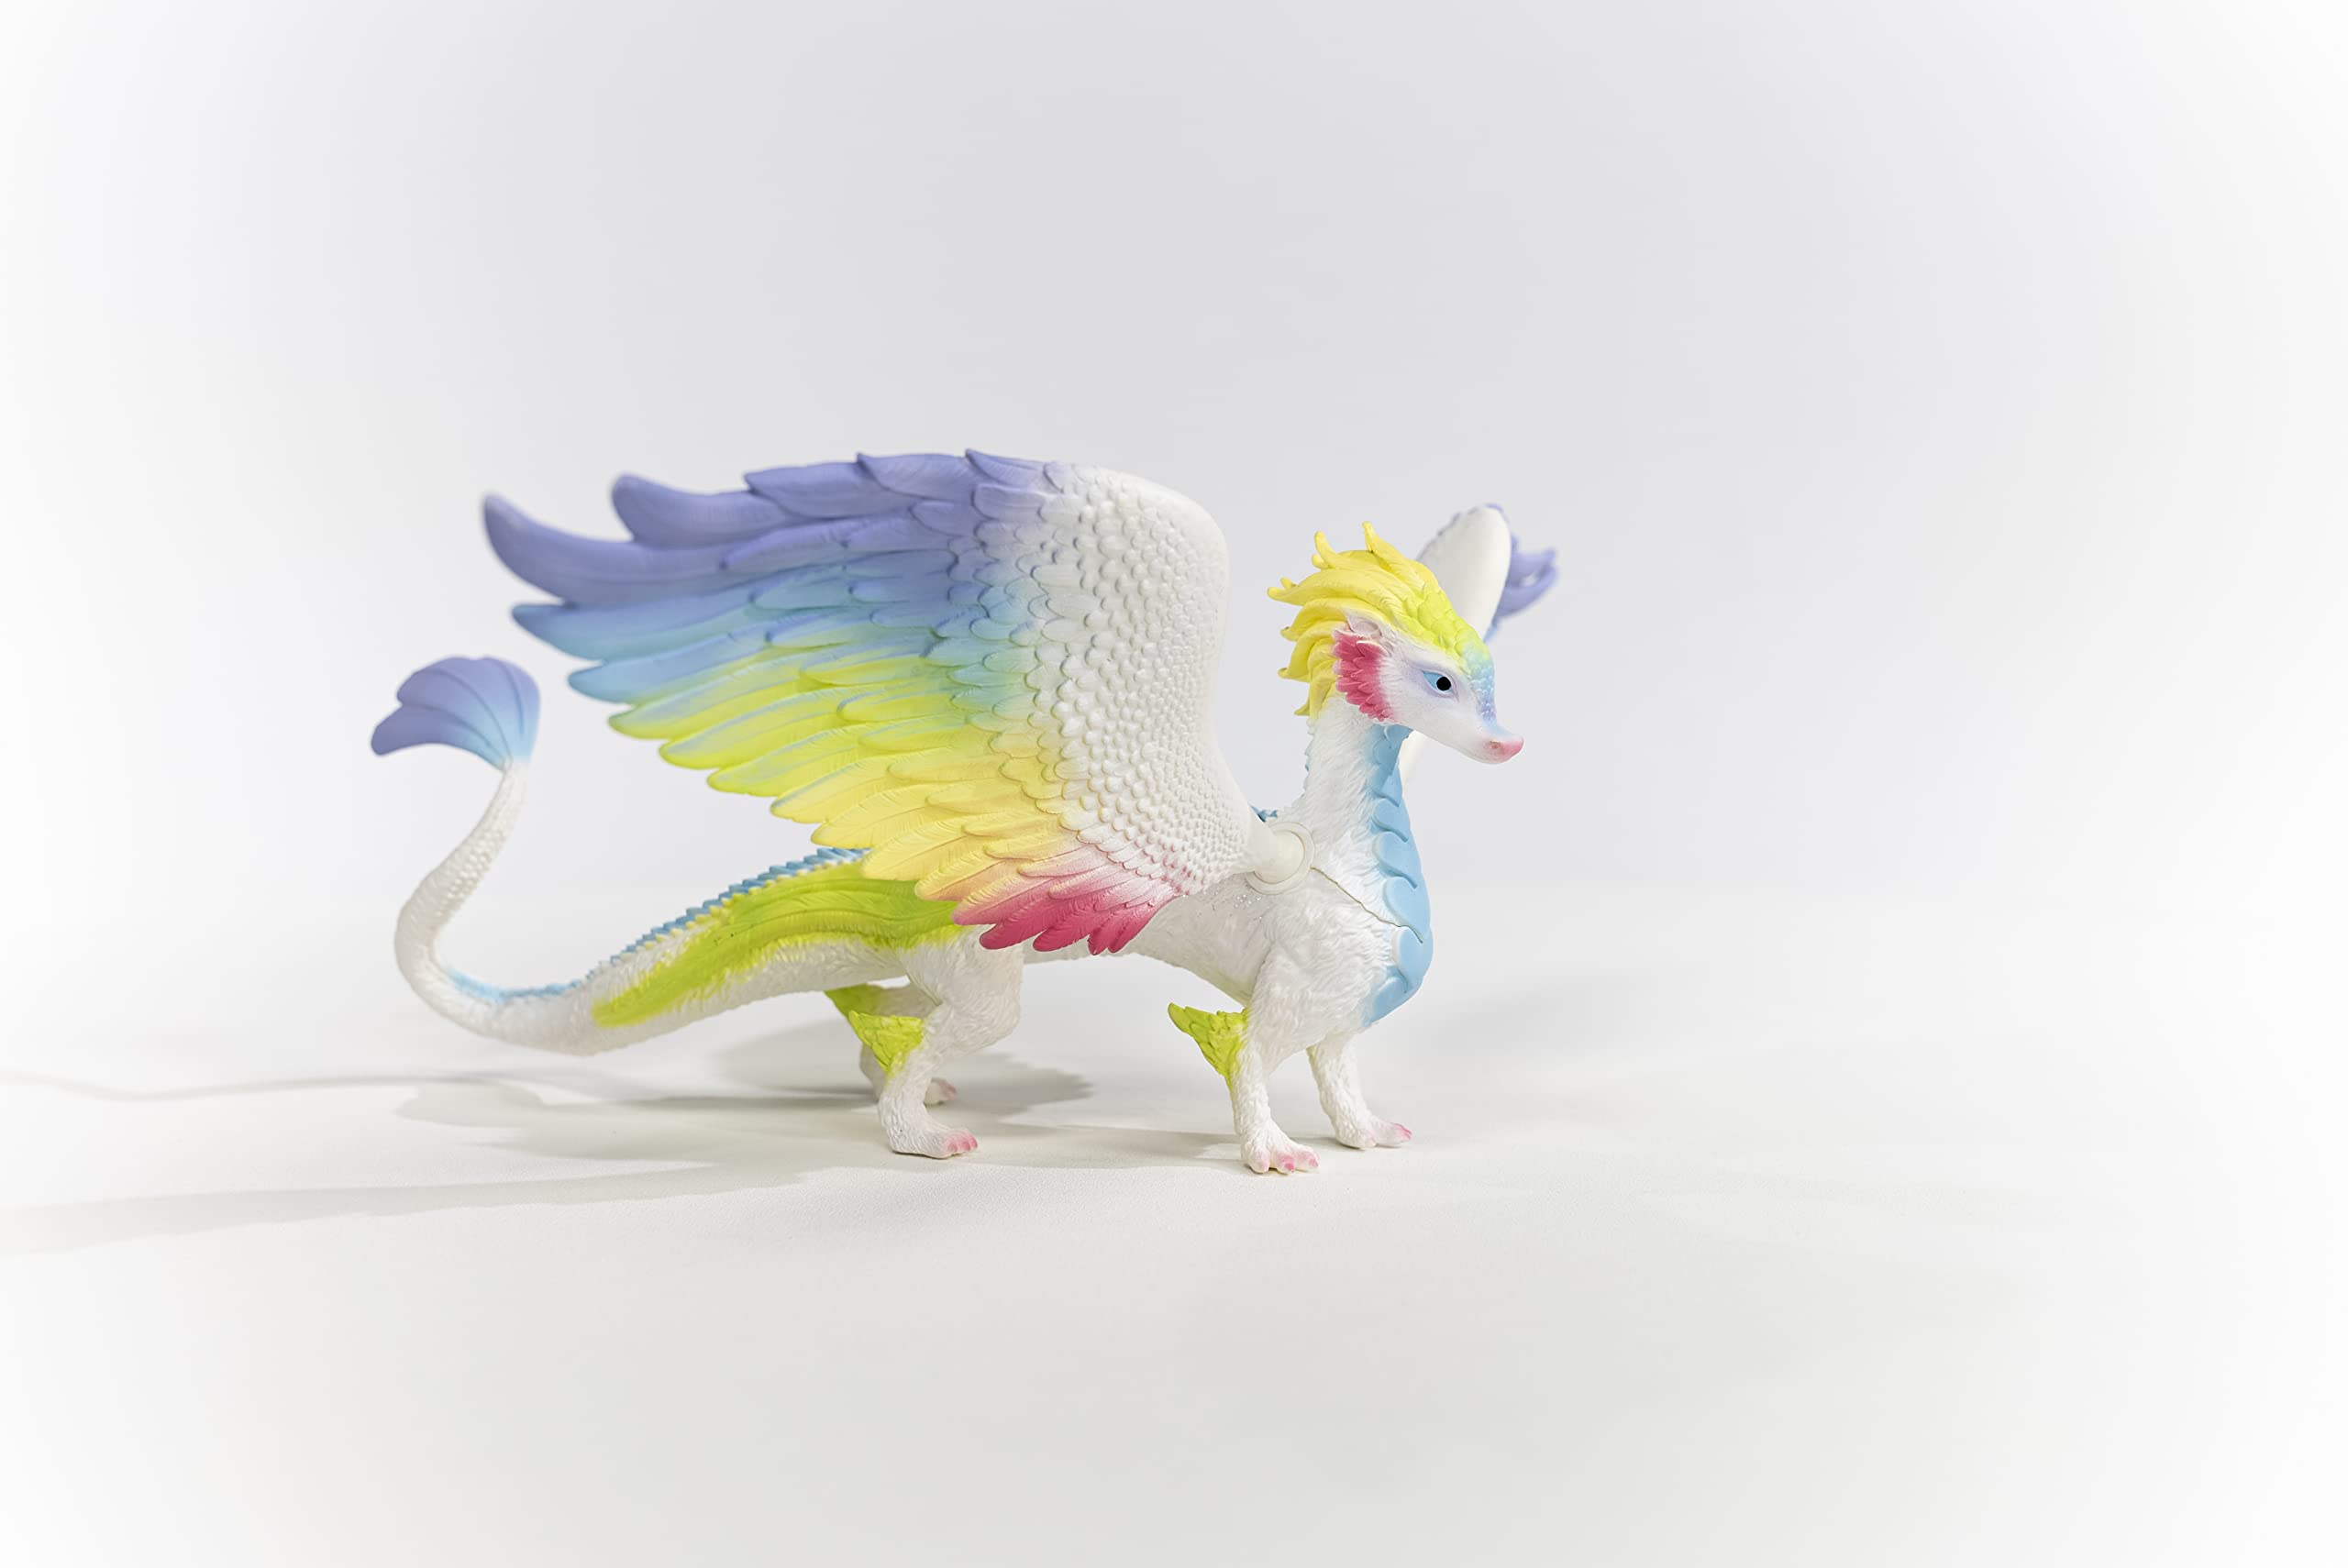 Schleich bayala, Mythical Creatures Toys for Kids, Rainbow Dragon Figurine with Movable Wings, Ages 5+